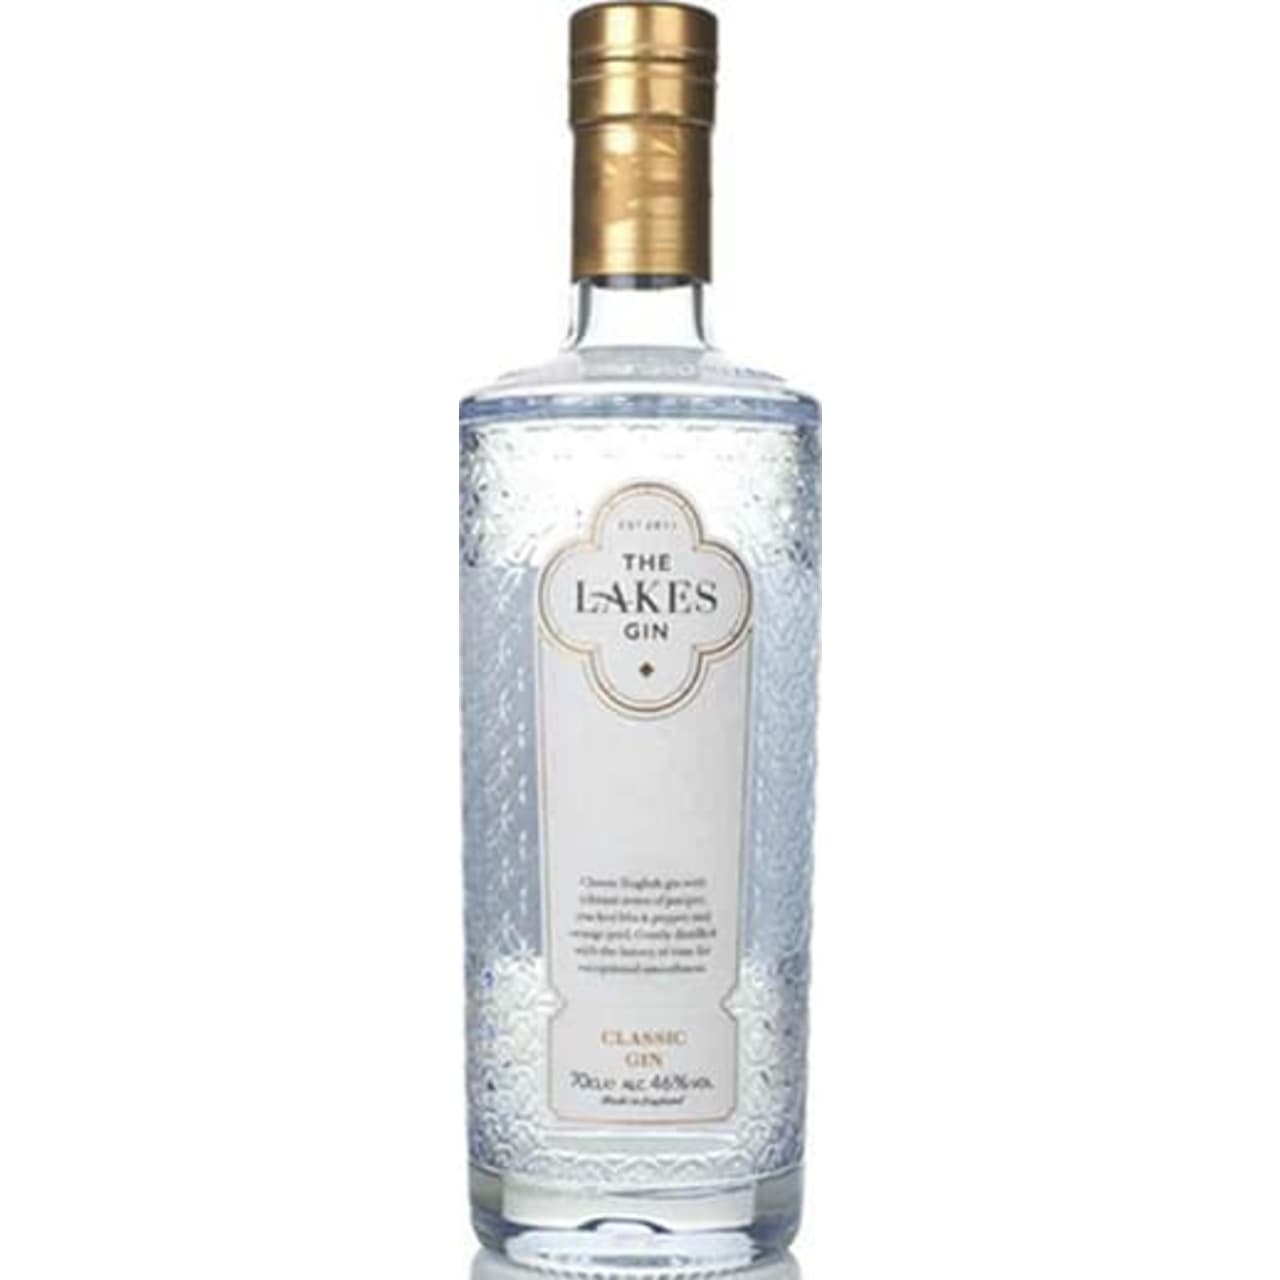 A classic gin with vibrant notes of juniper, orange peel and lemon citrus. A well balanced palate of nine carefully selected botanicals macerated for up to 18 hours in warmed British wheat spirit, along with pure Cumbrian water.